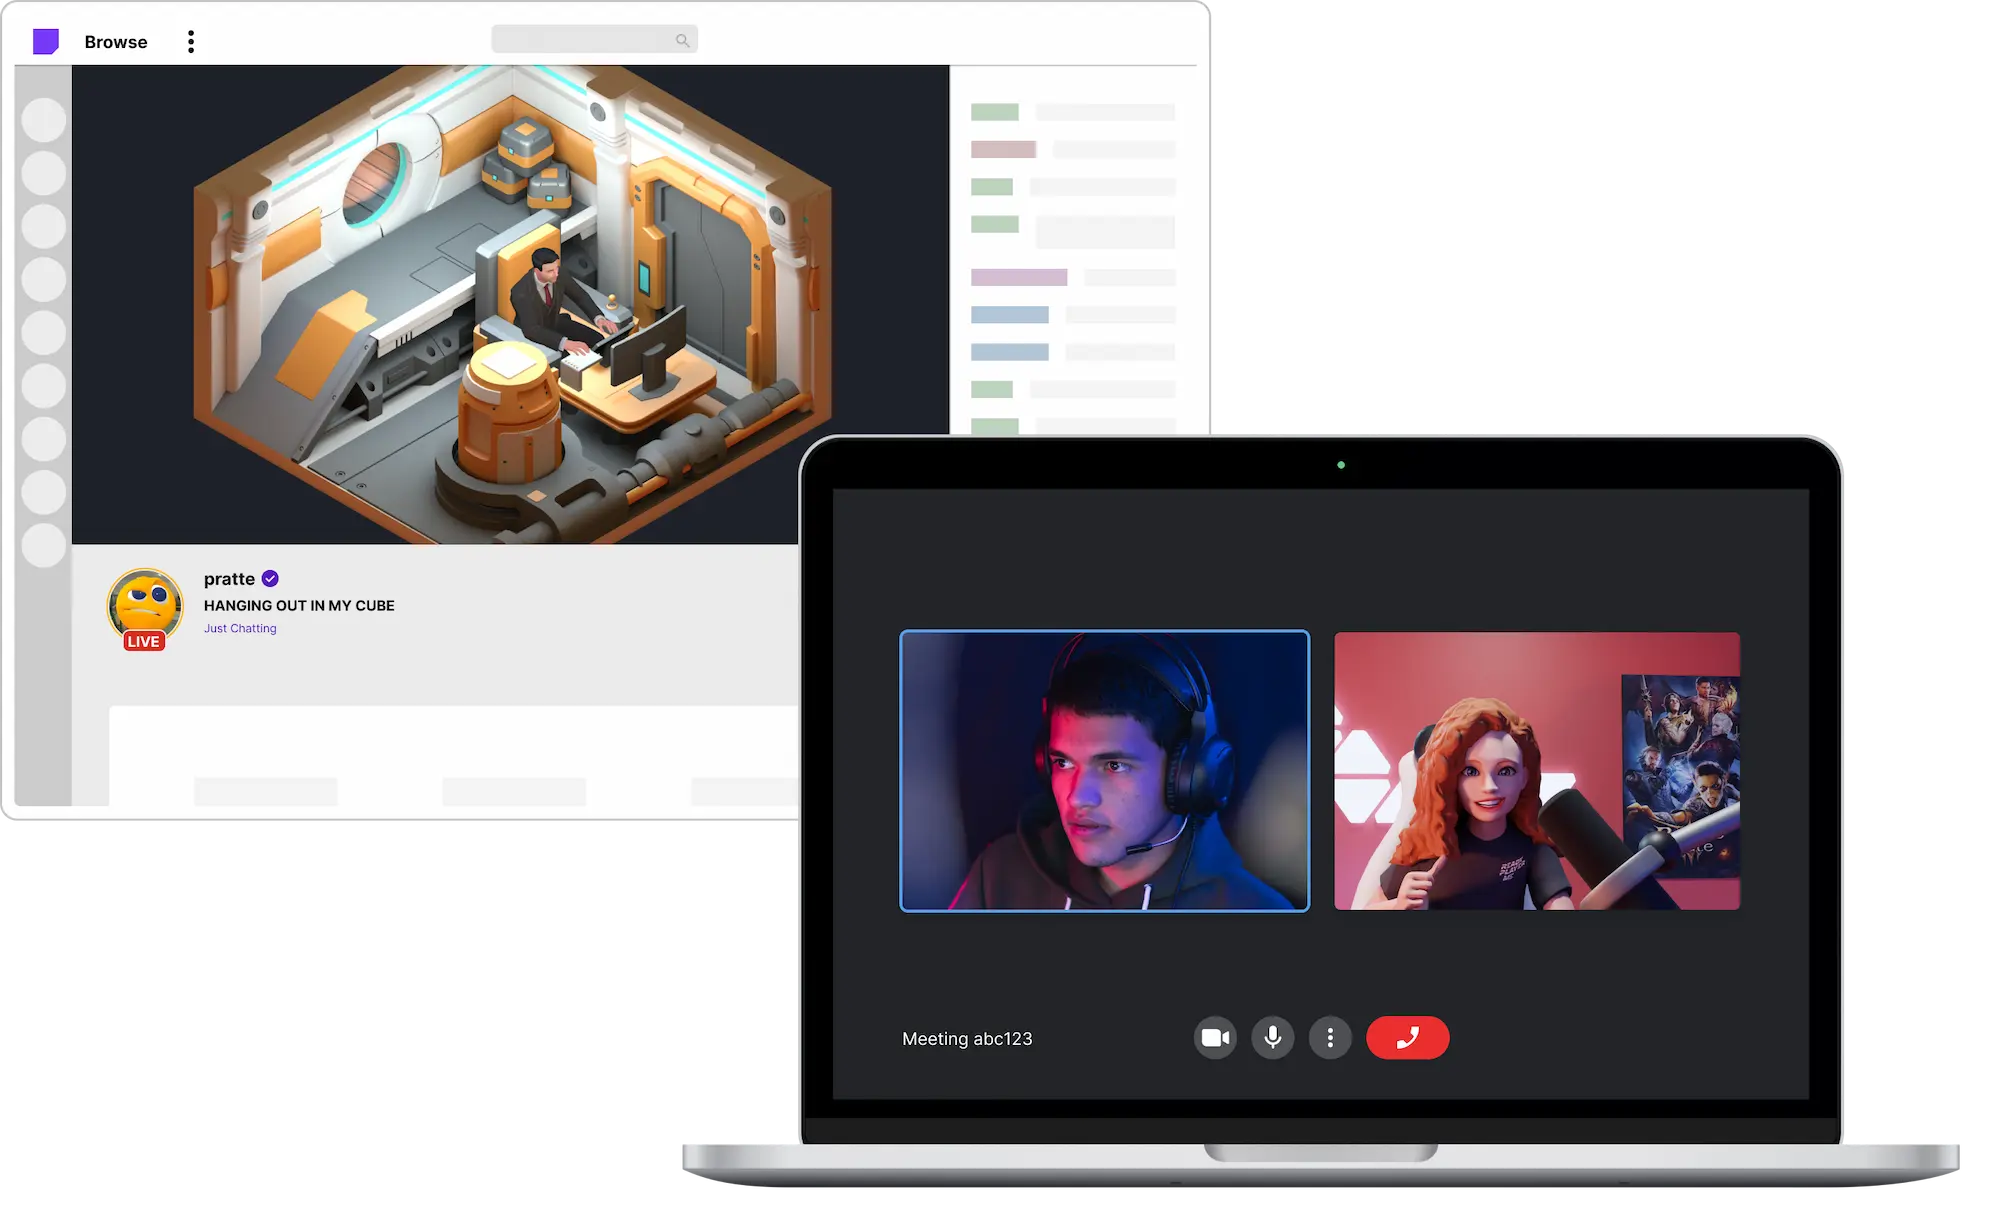 Laptop open to a video call with one user showing a video feed of themself and the other appearing as a 3D character. Behind it is a screenshot of a streaming service showing a 3D character seated in an isometric room